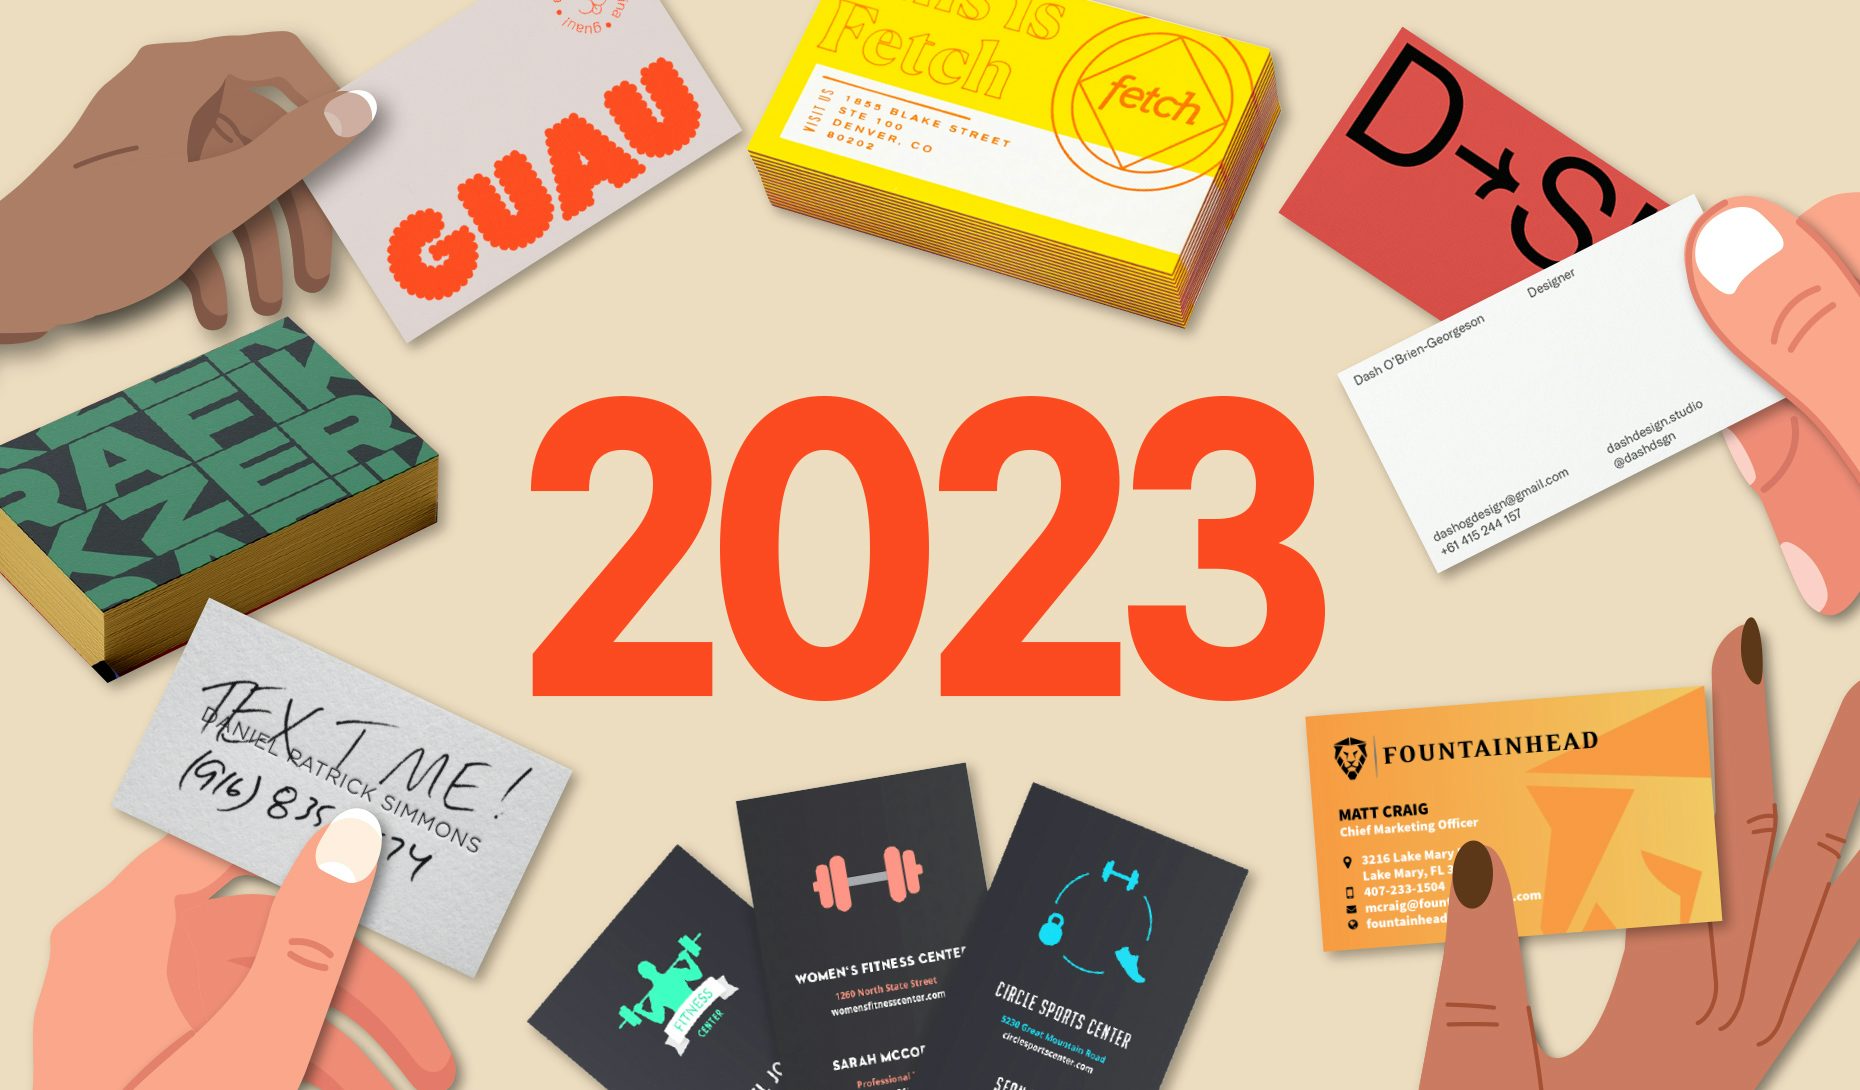 Make Logos, Business Cards, Social Designs and More, BrandCrowd in 2023